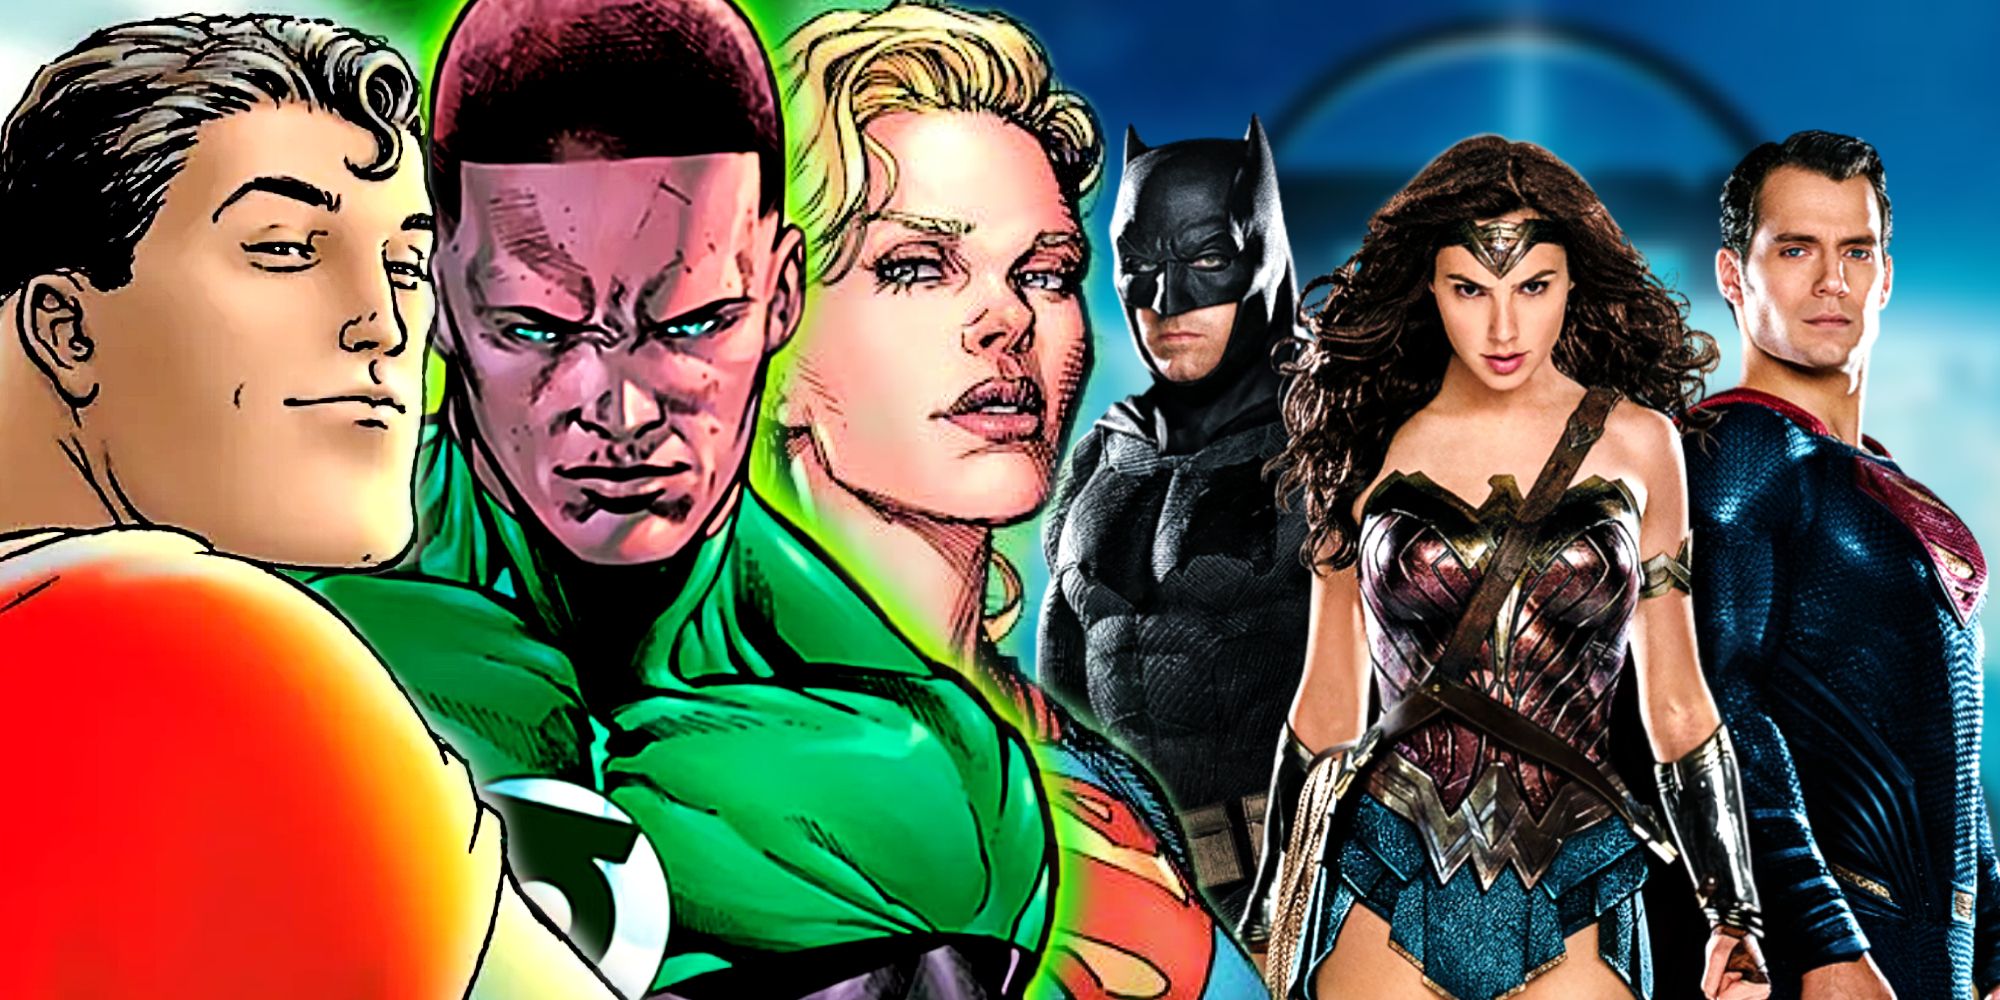 The DCU's Superman, Supergirl, and Green Lantern vs The DCEU's Justice League